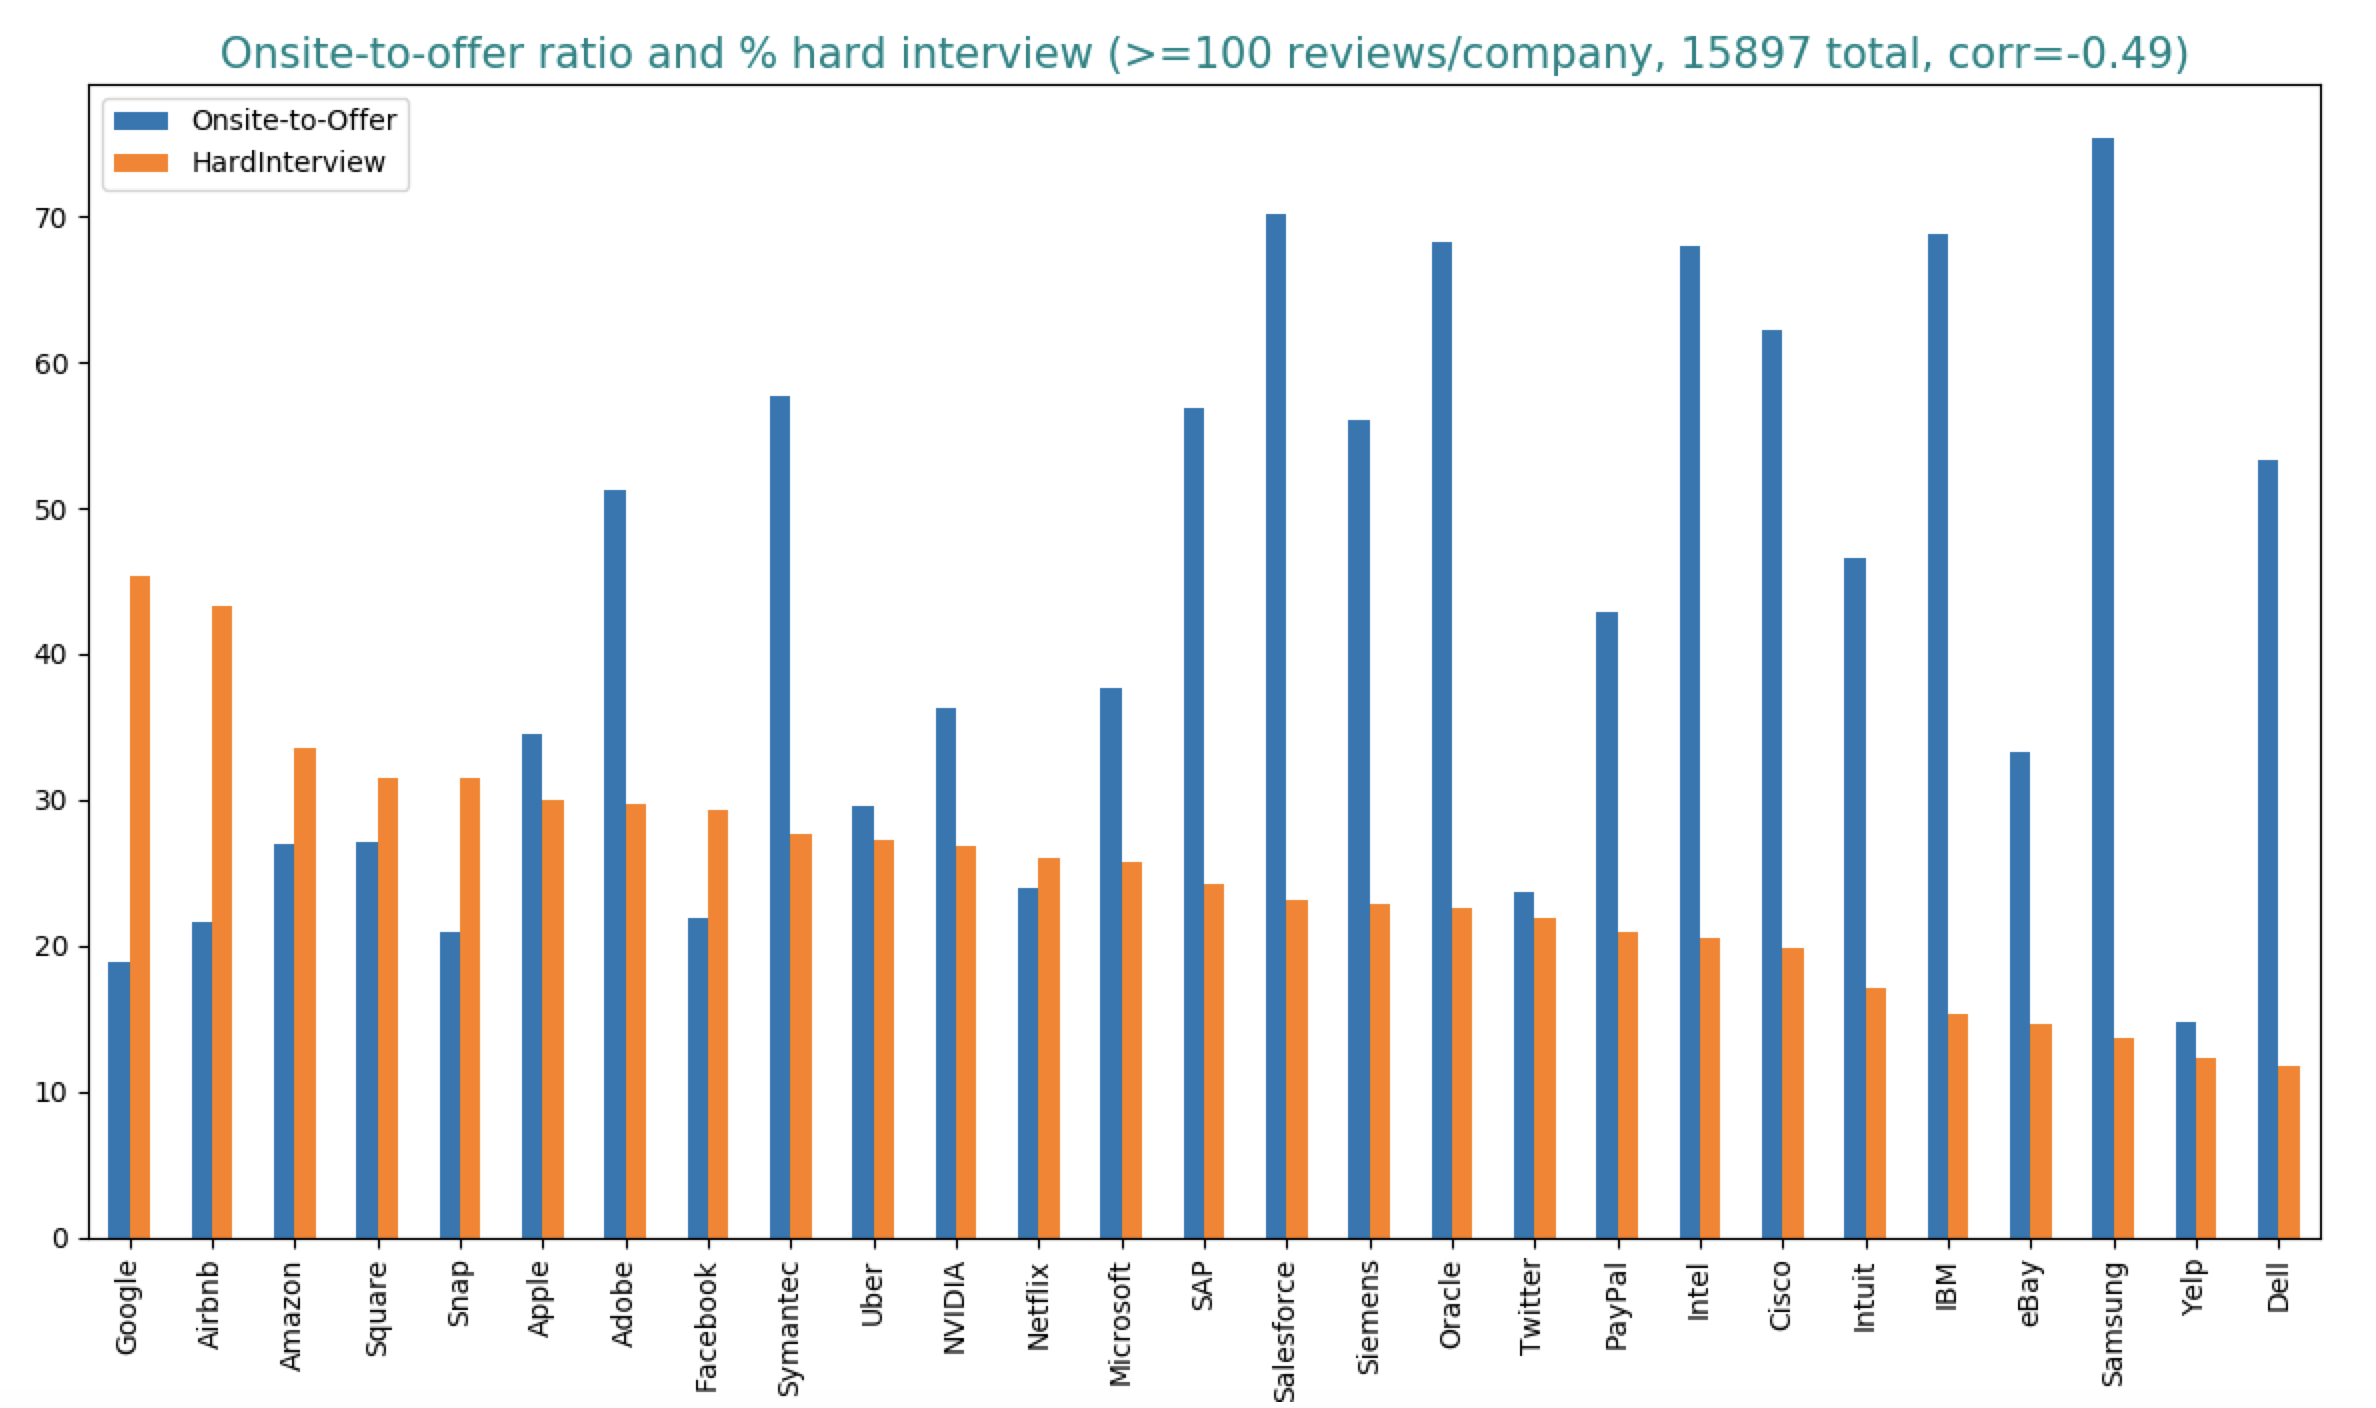 Correlation between interview diffiulty and offer